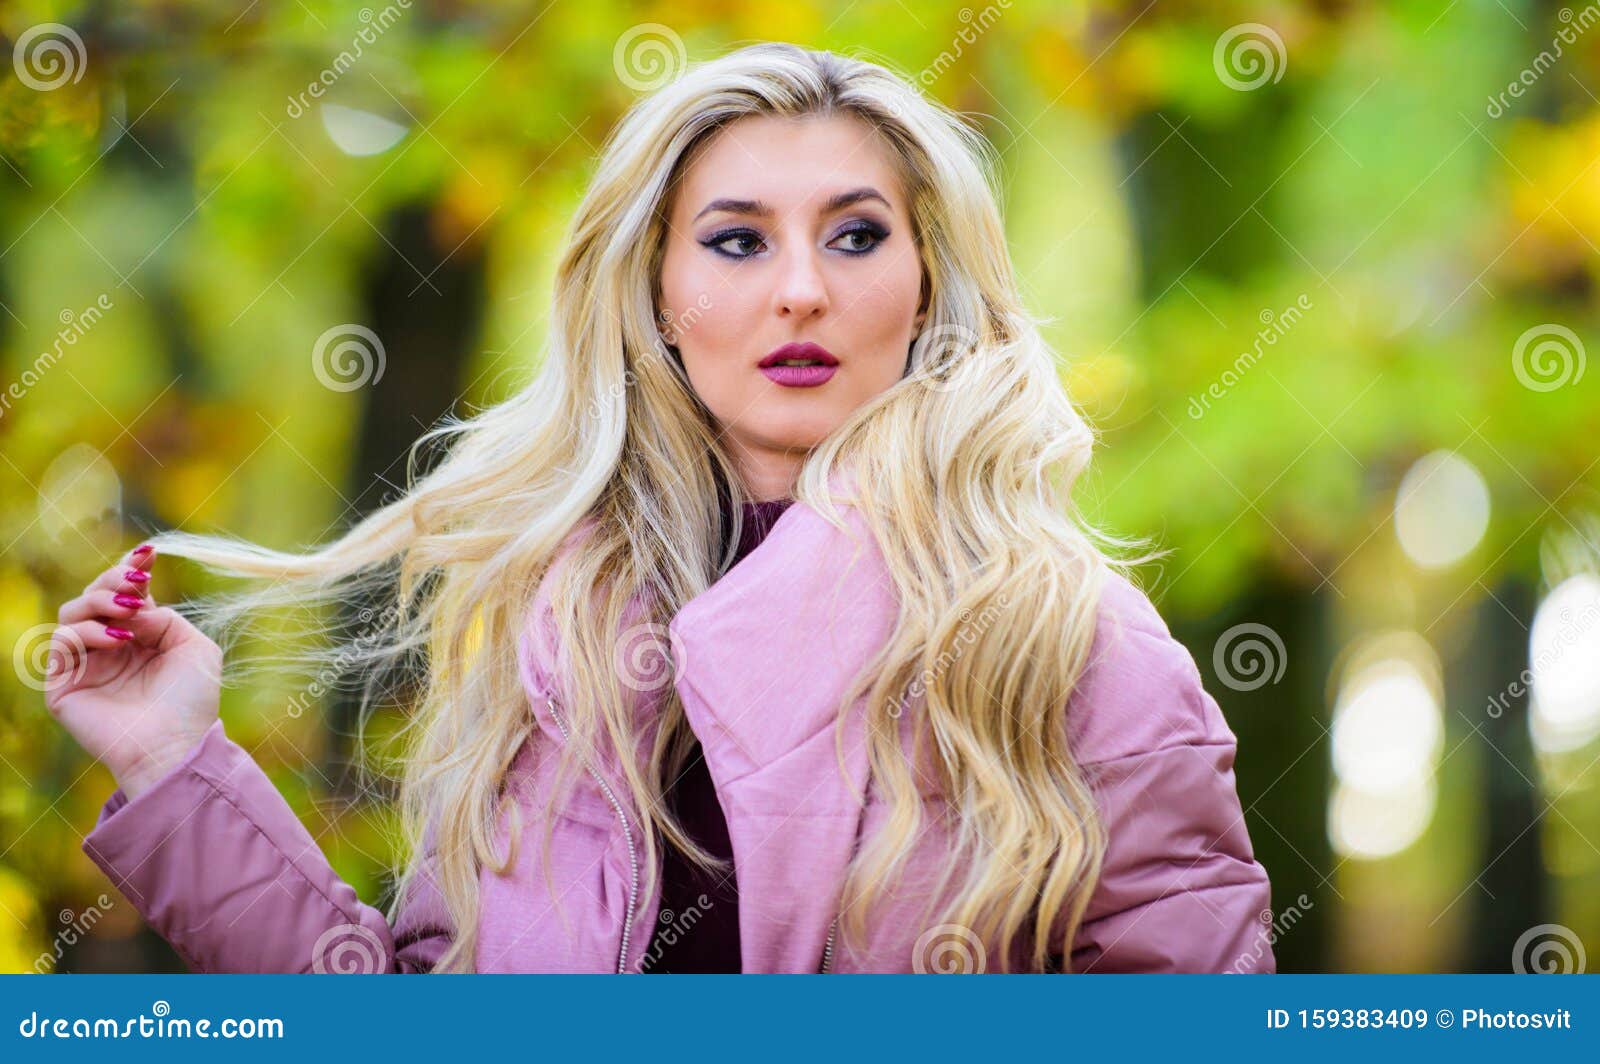 Autumn Hair Care Concept. Autumn Hair Care is Important so As To Avoid Dry  Frizzy Hair. Cold Blonde Concept Stock Image - Image of concept, curly:  159383409